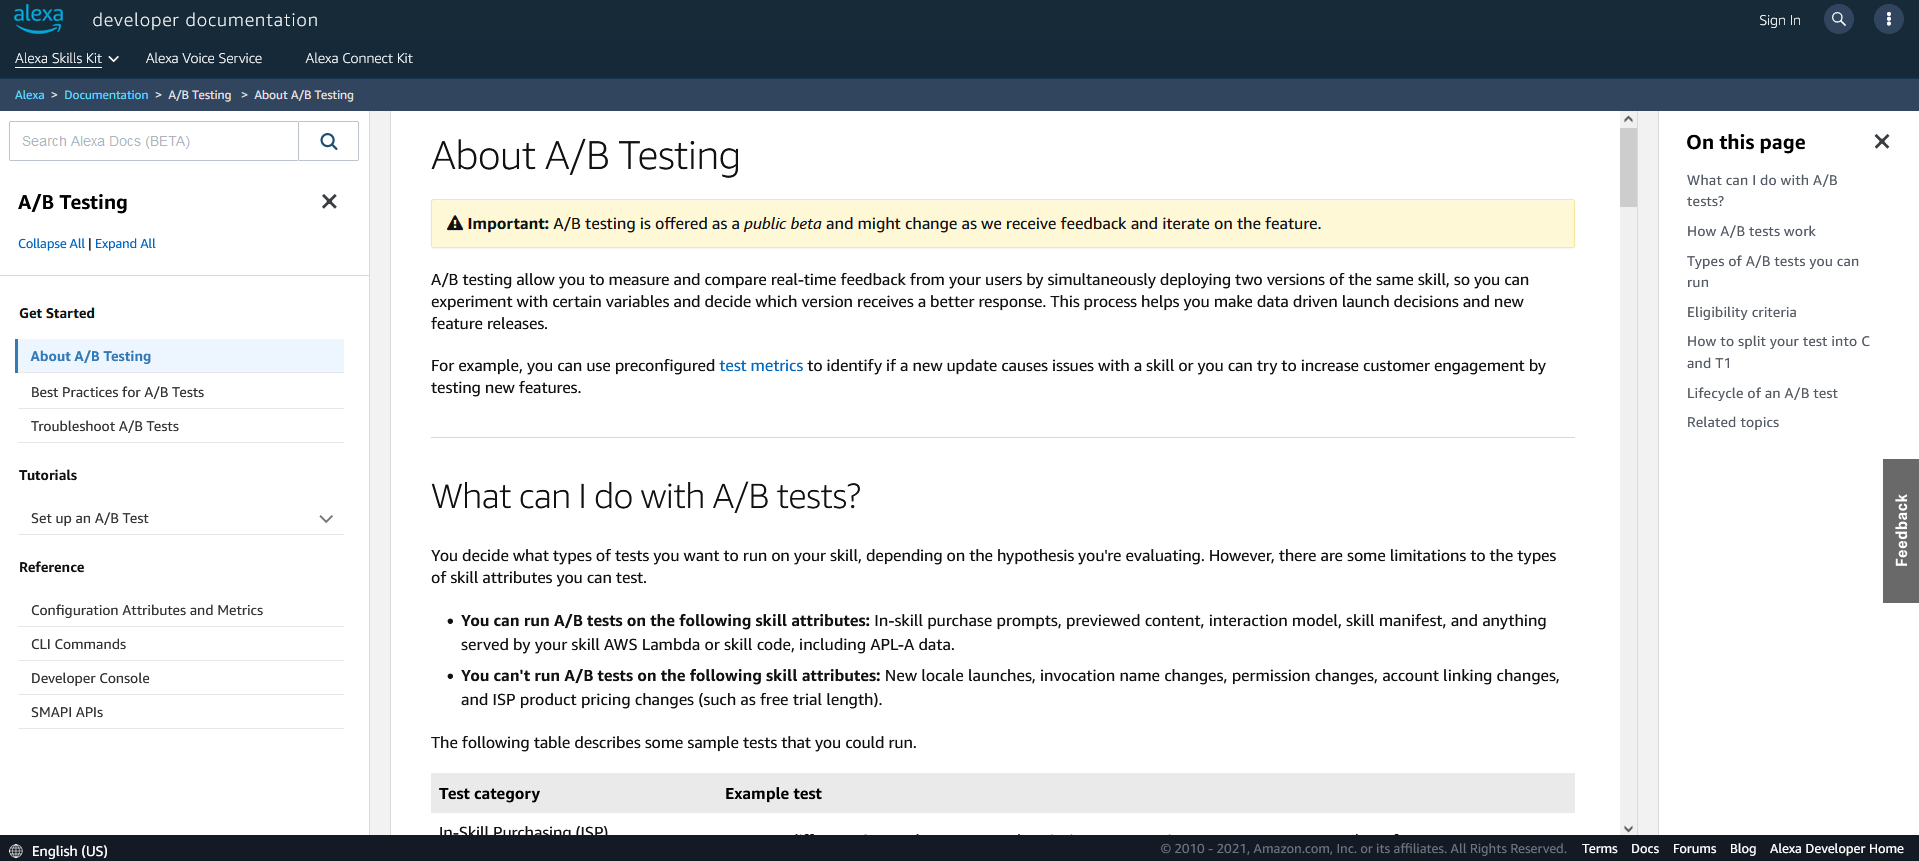 About A/B Testing